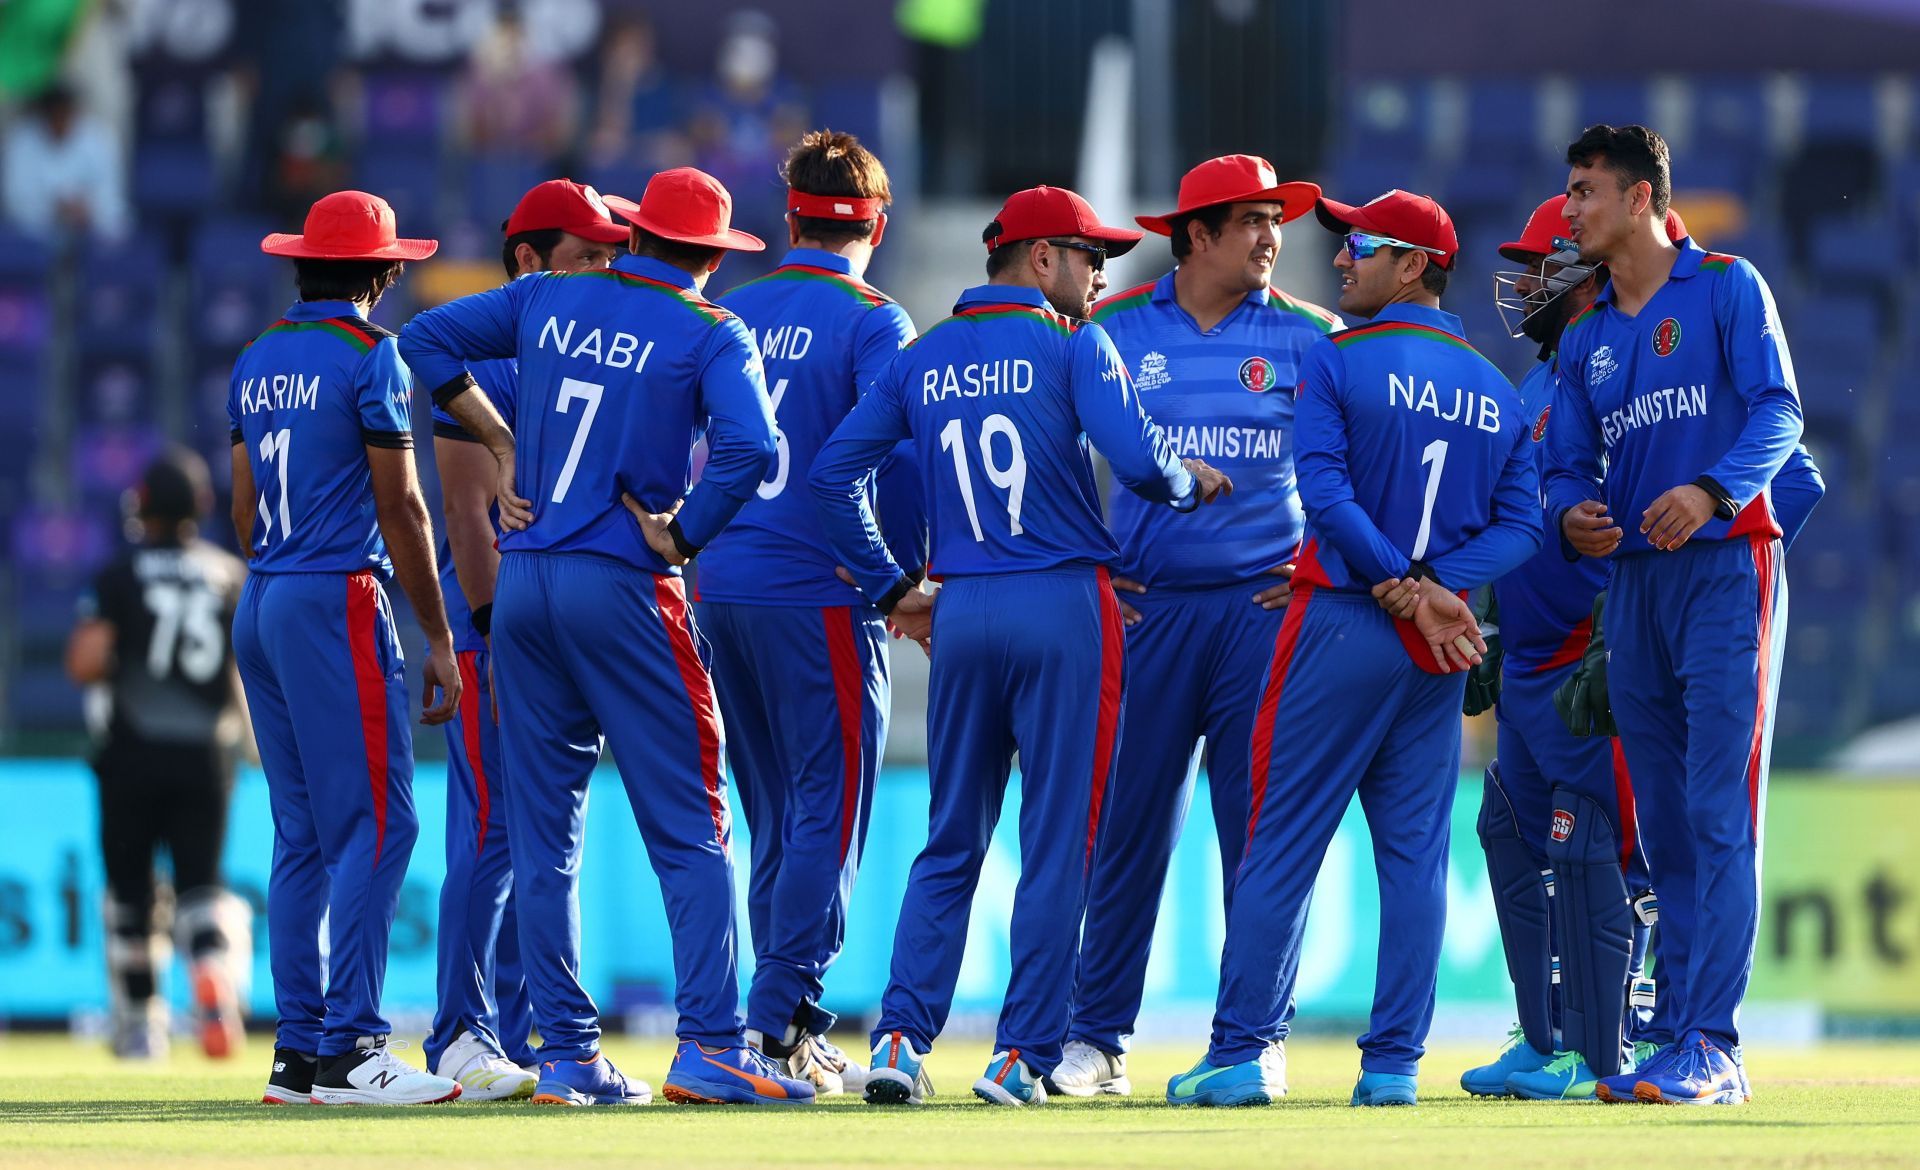 Afghanistan cricket team. (Image source: Getty)